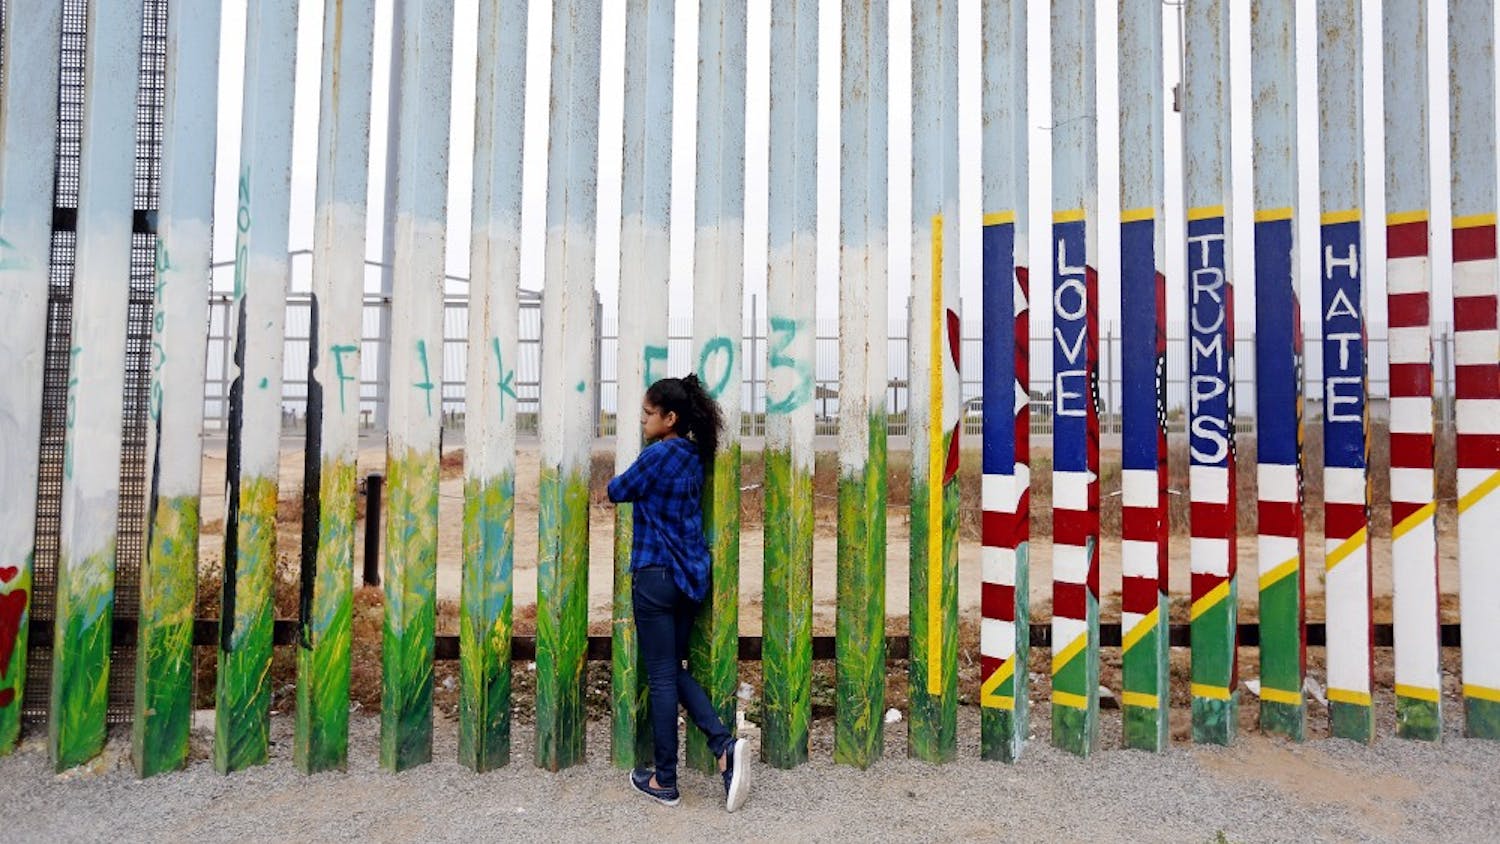 Jade Vega, 14, of Peru, peers through the fence at Friendship Park at the beach along the U.S.-Mexico border in Tijuana, Baja Calif., on July 29, 2017. Vega, who says she is a U.S. citizen, was visiting her mother in Tijuana for the summer. (Gary Coronado/Los Angeles Times/TNS)